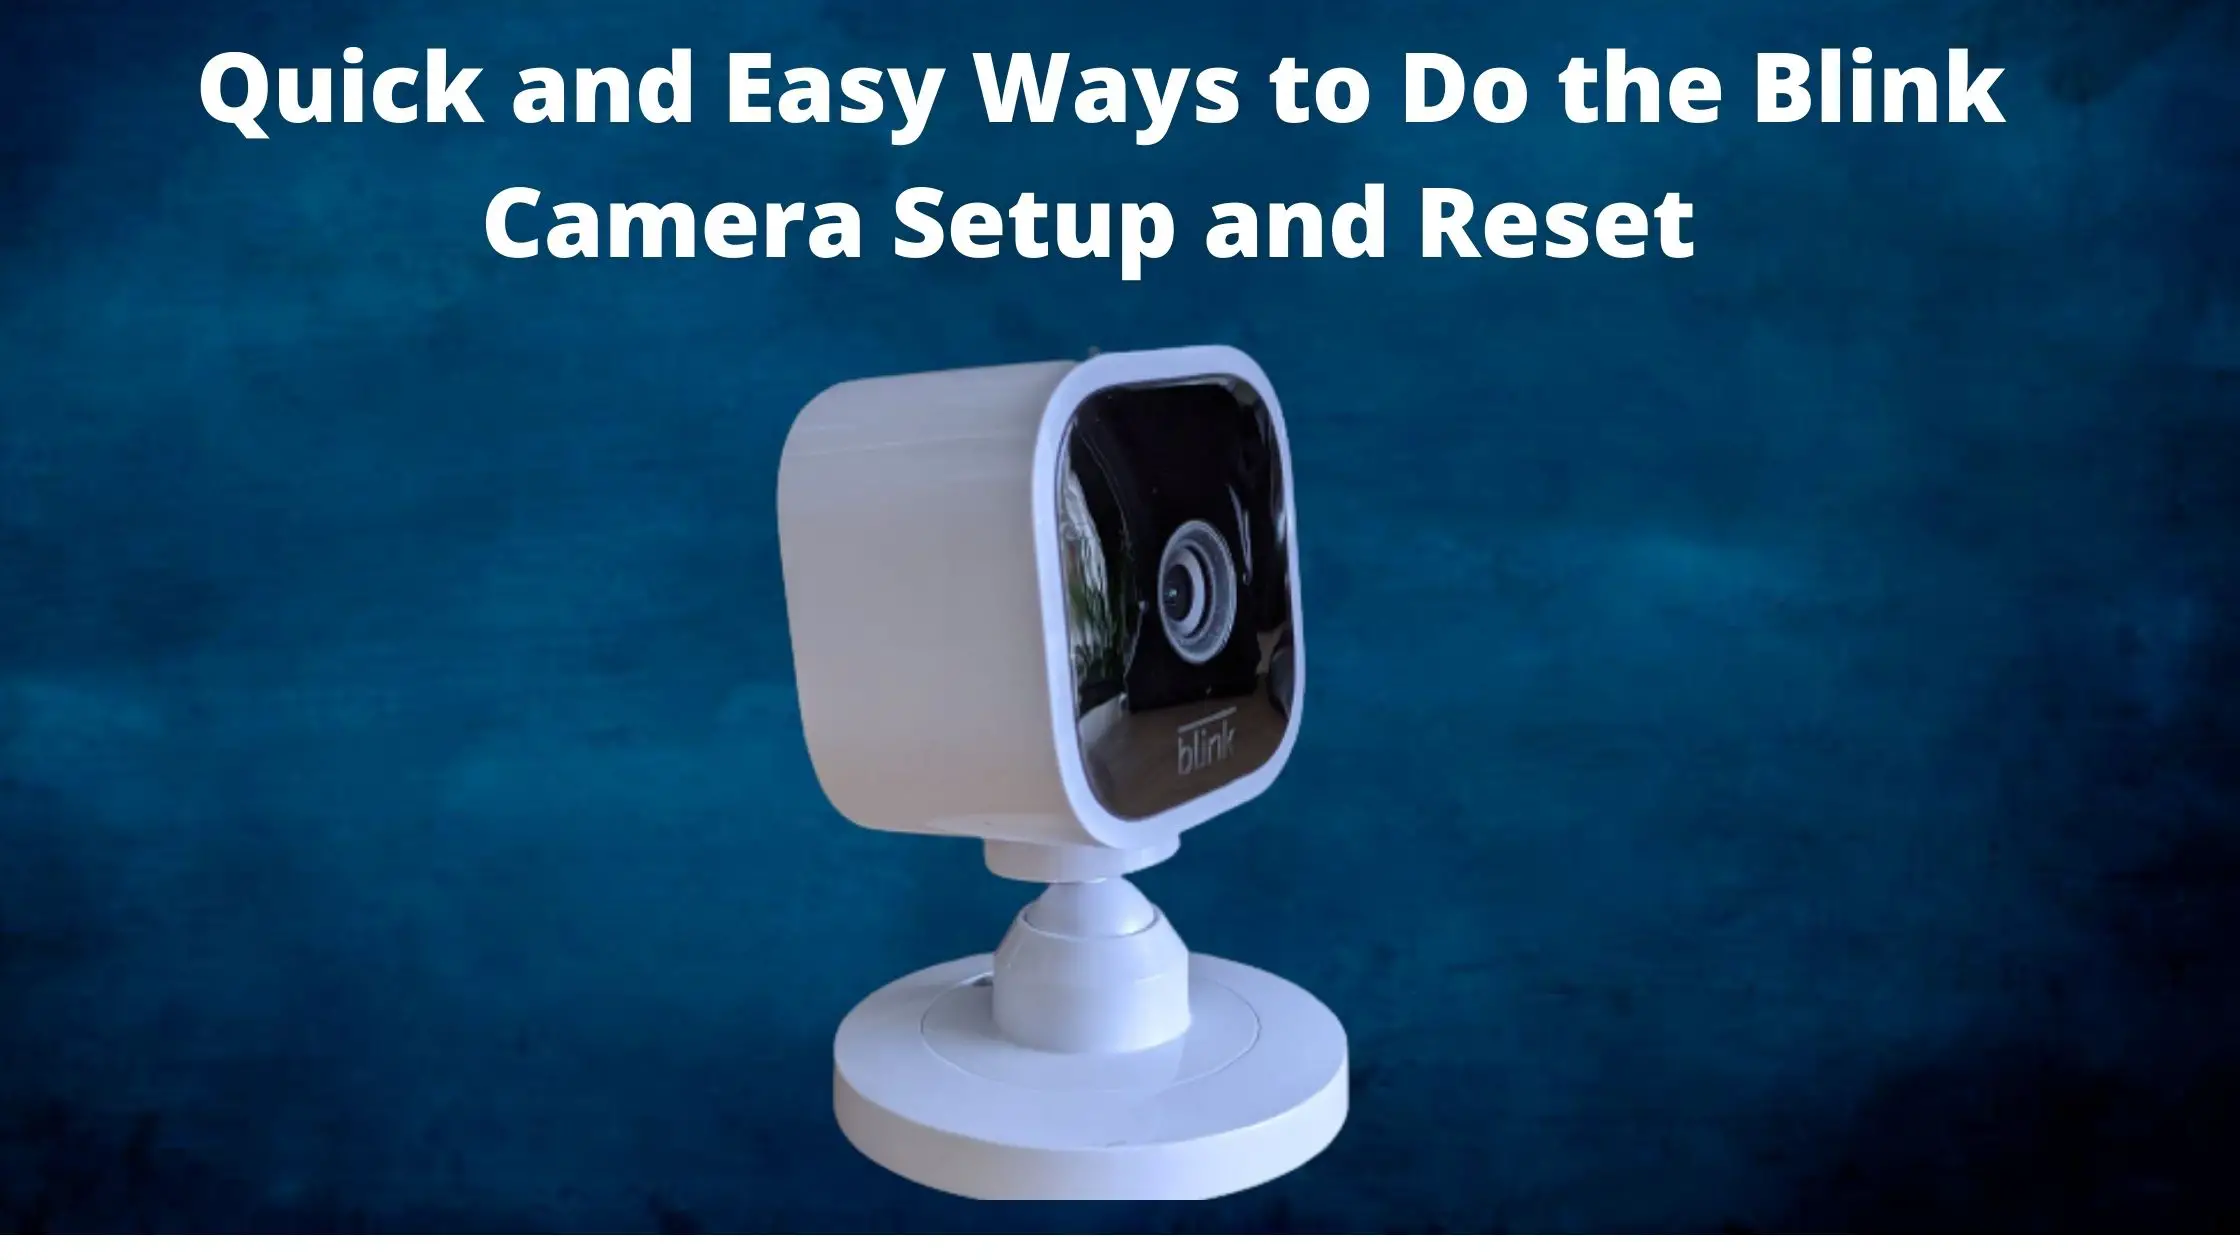 Quick and Easy Ways to do the Blink Camera Setup and Reset